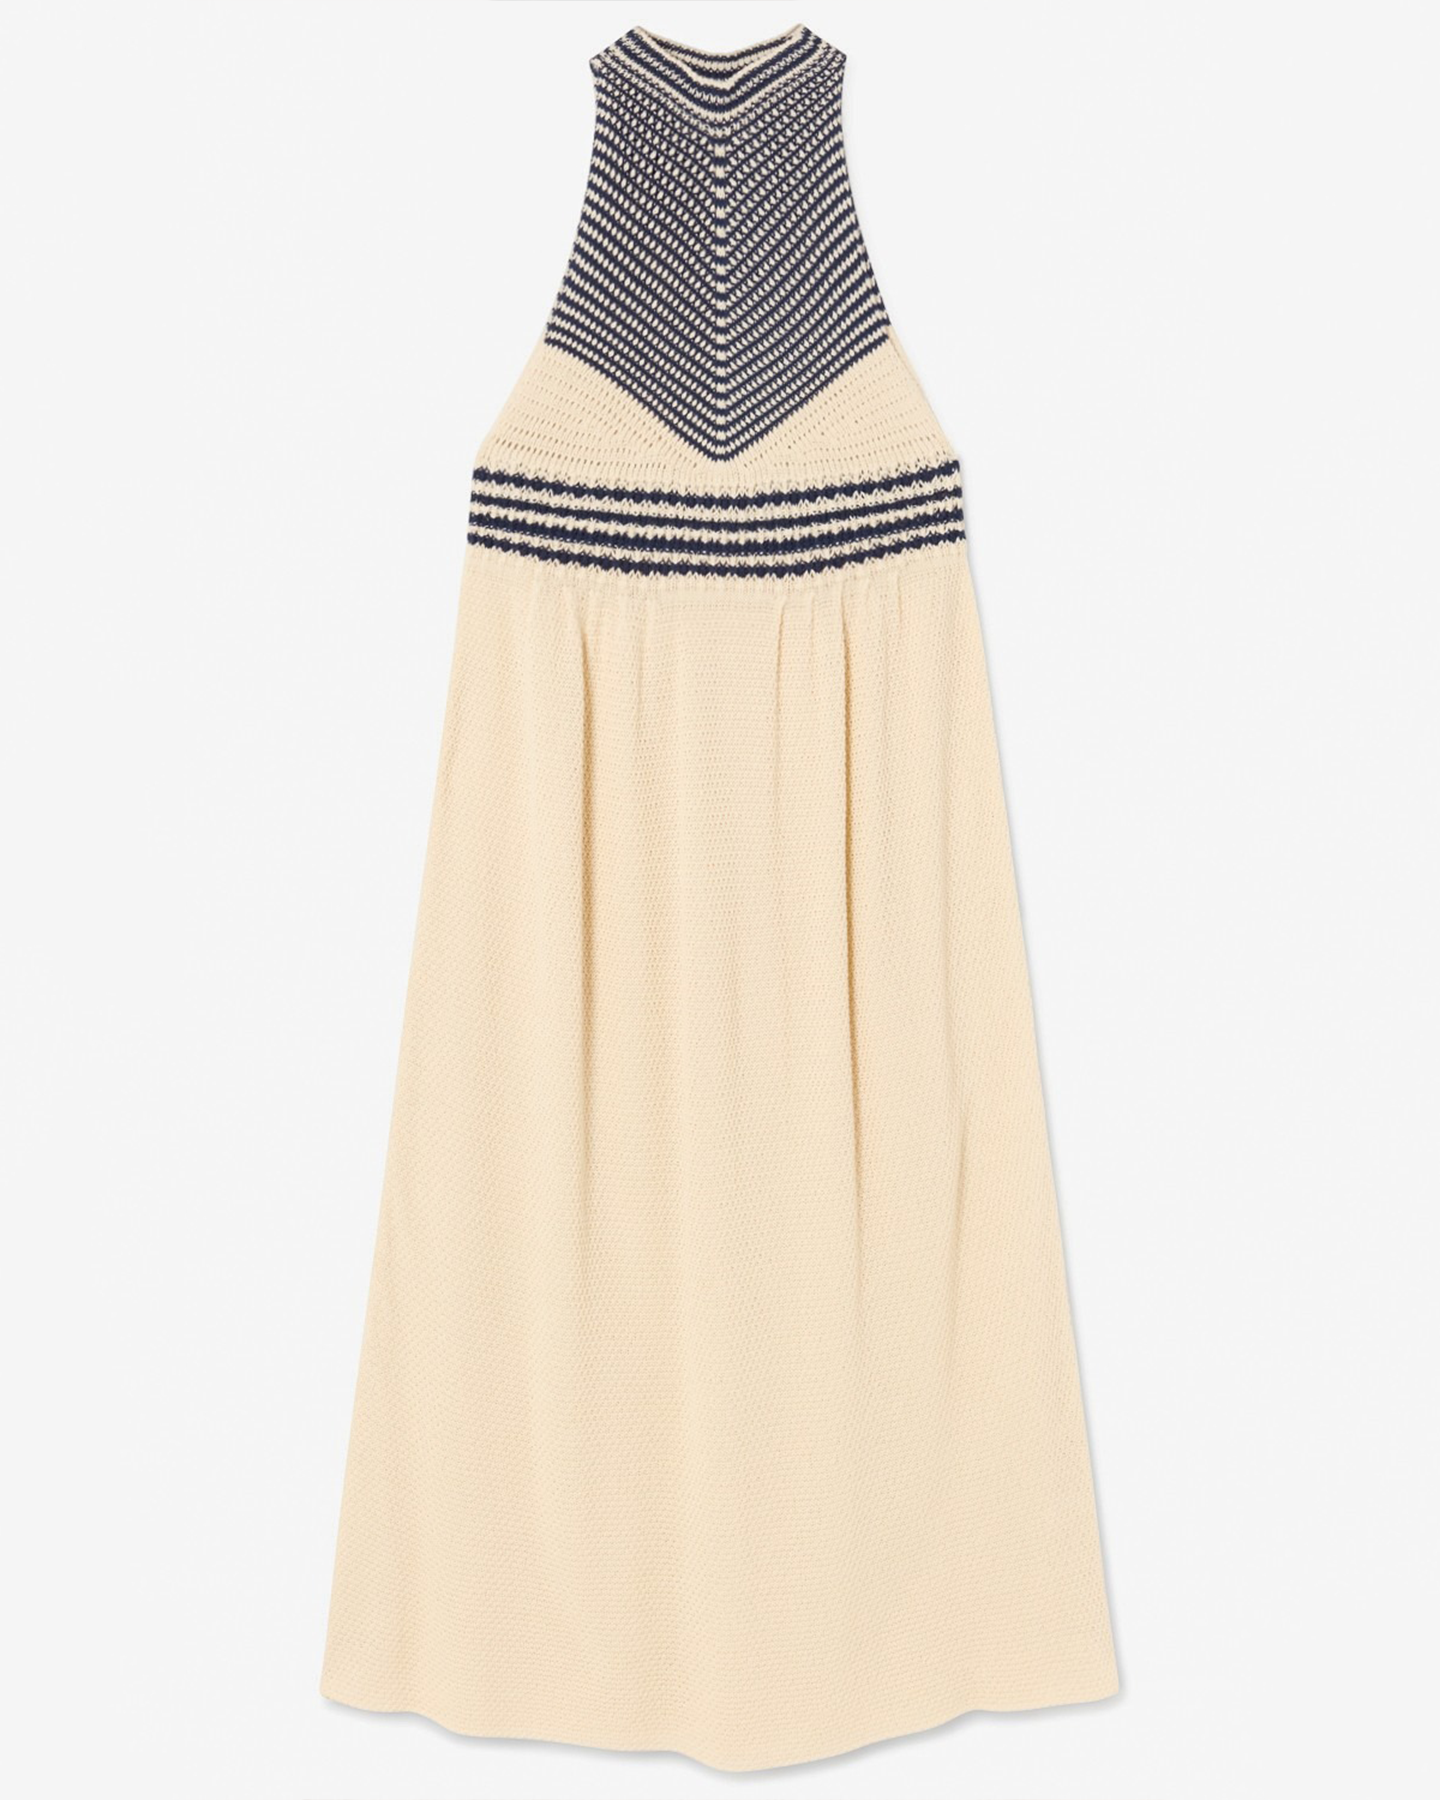 TEXTURED HALTER DRESS WITH NAVY PIPING - ECRU